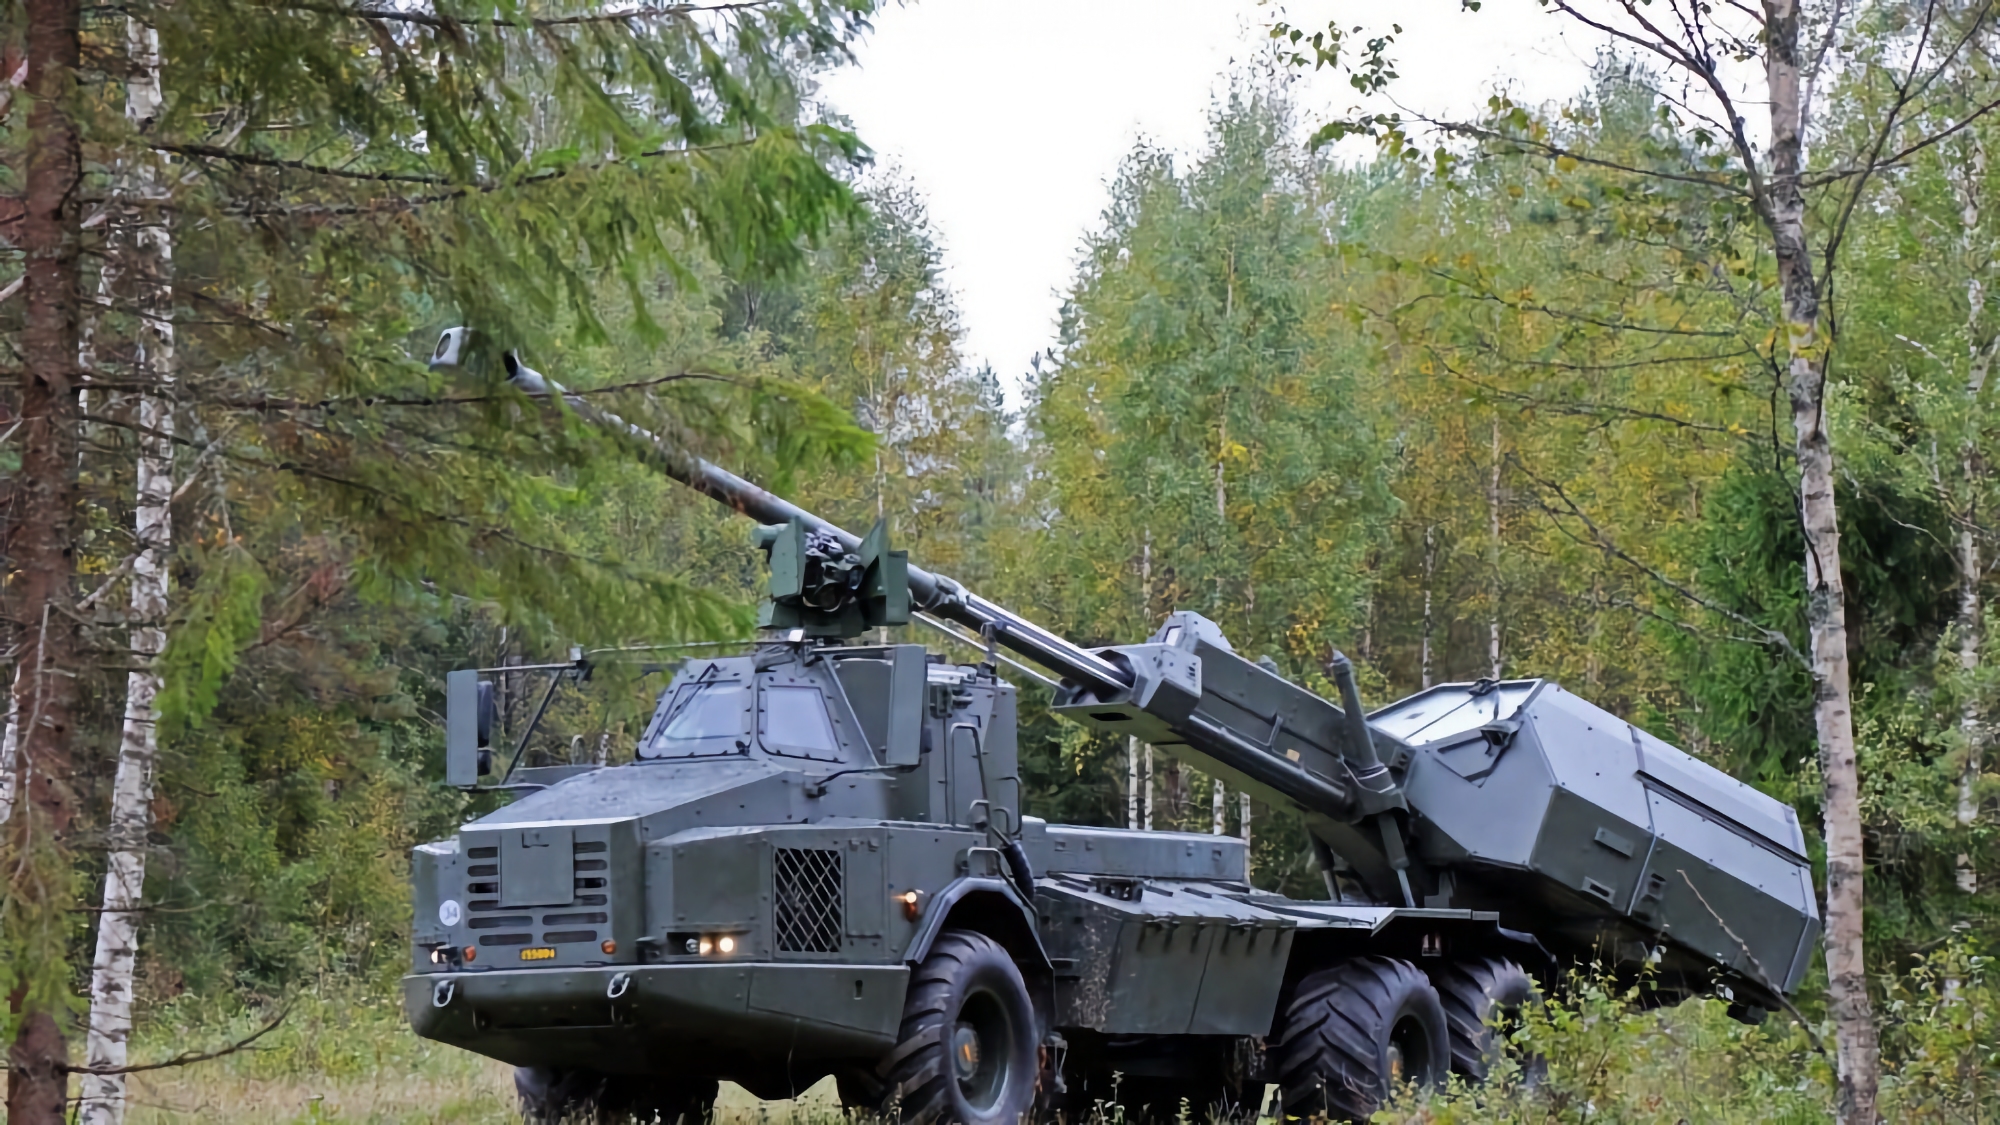 The British Army has received an additional batch of Swedish Archer self-propelled artillery systems into service